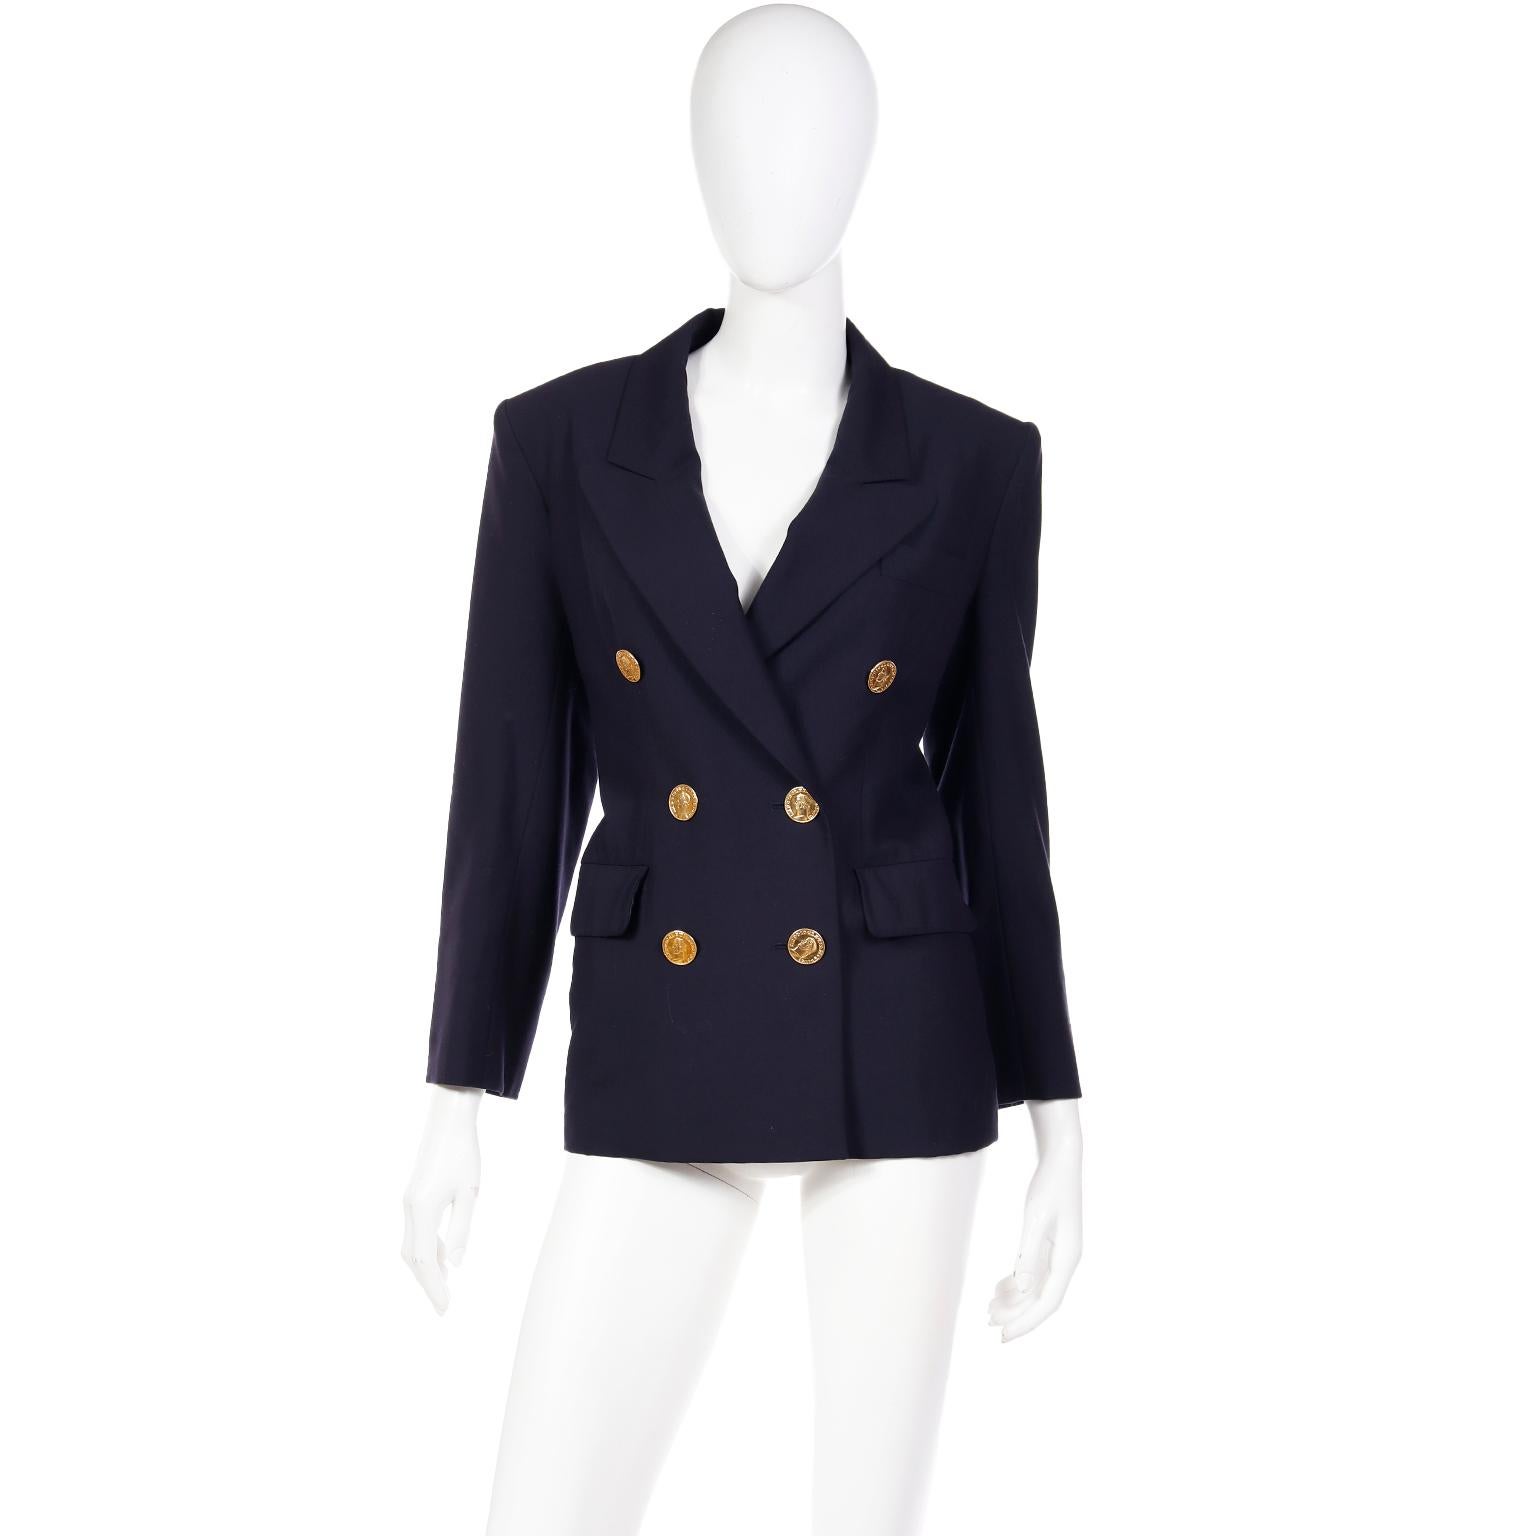 This Yves Saint Laurent navy blue wool blazer is from the YSL Spring / Summer 1991 Rive Gauche collection. This wonderful jacket has unique gold faux coin front button closures that add so much interest to the piece! Blazers like these can elevate